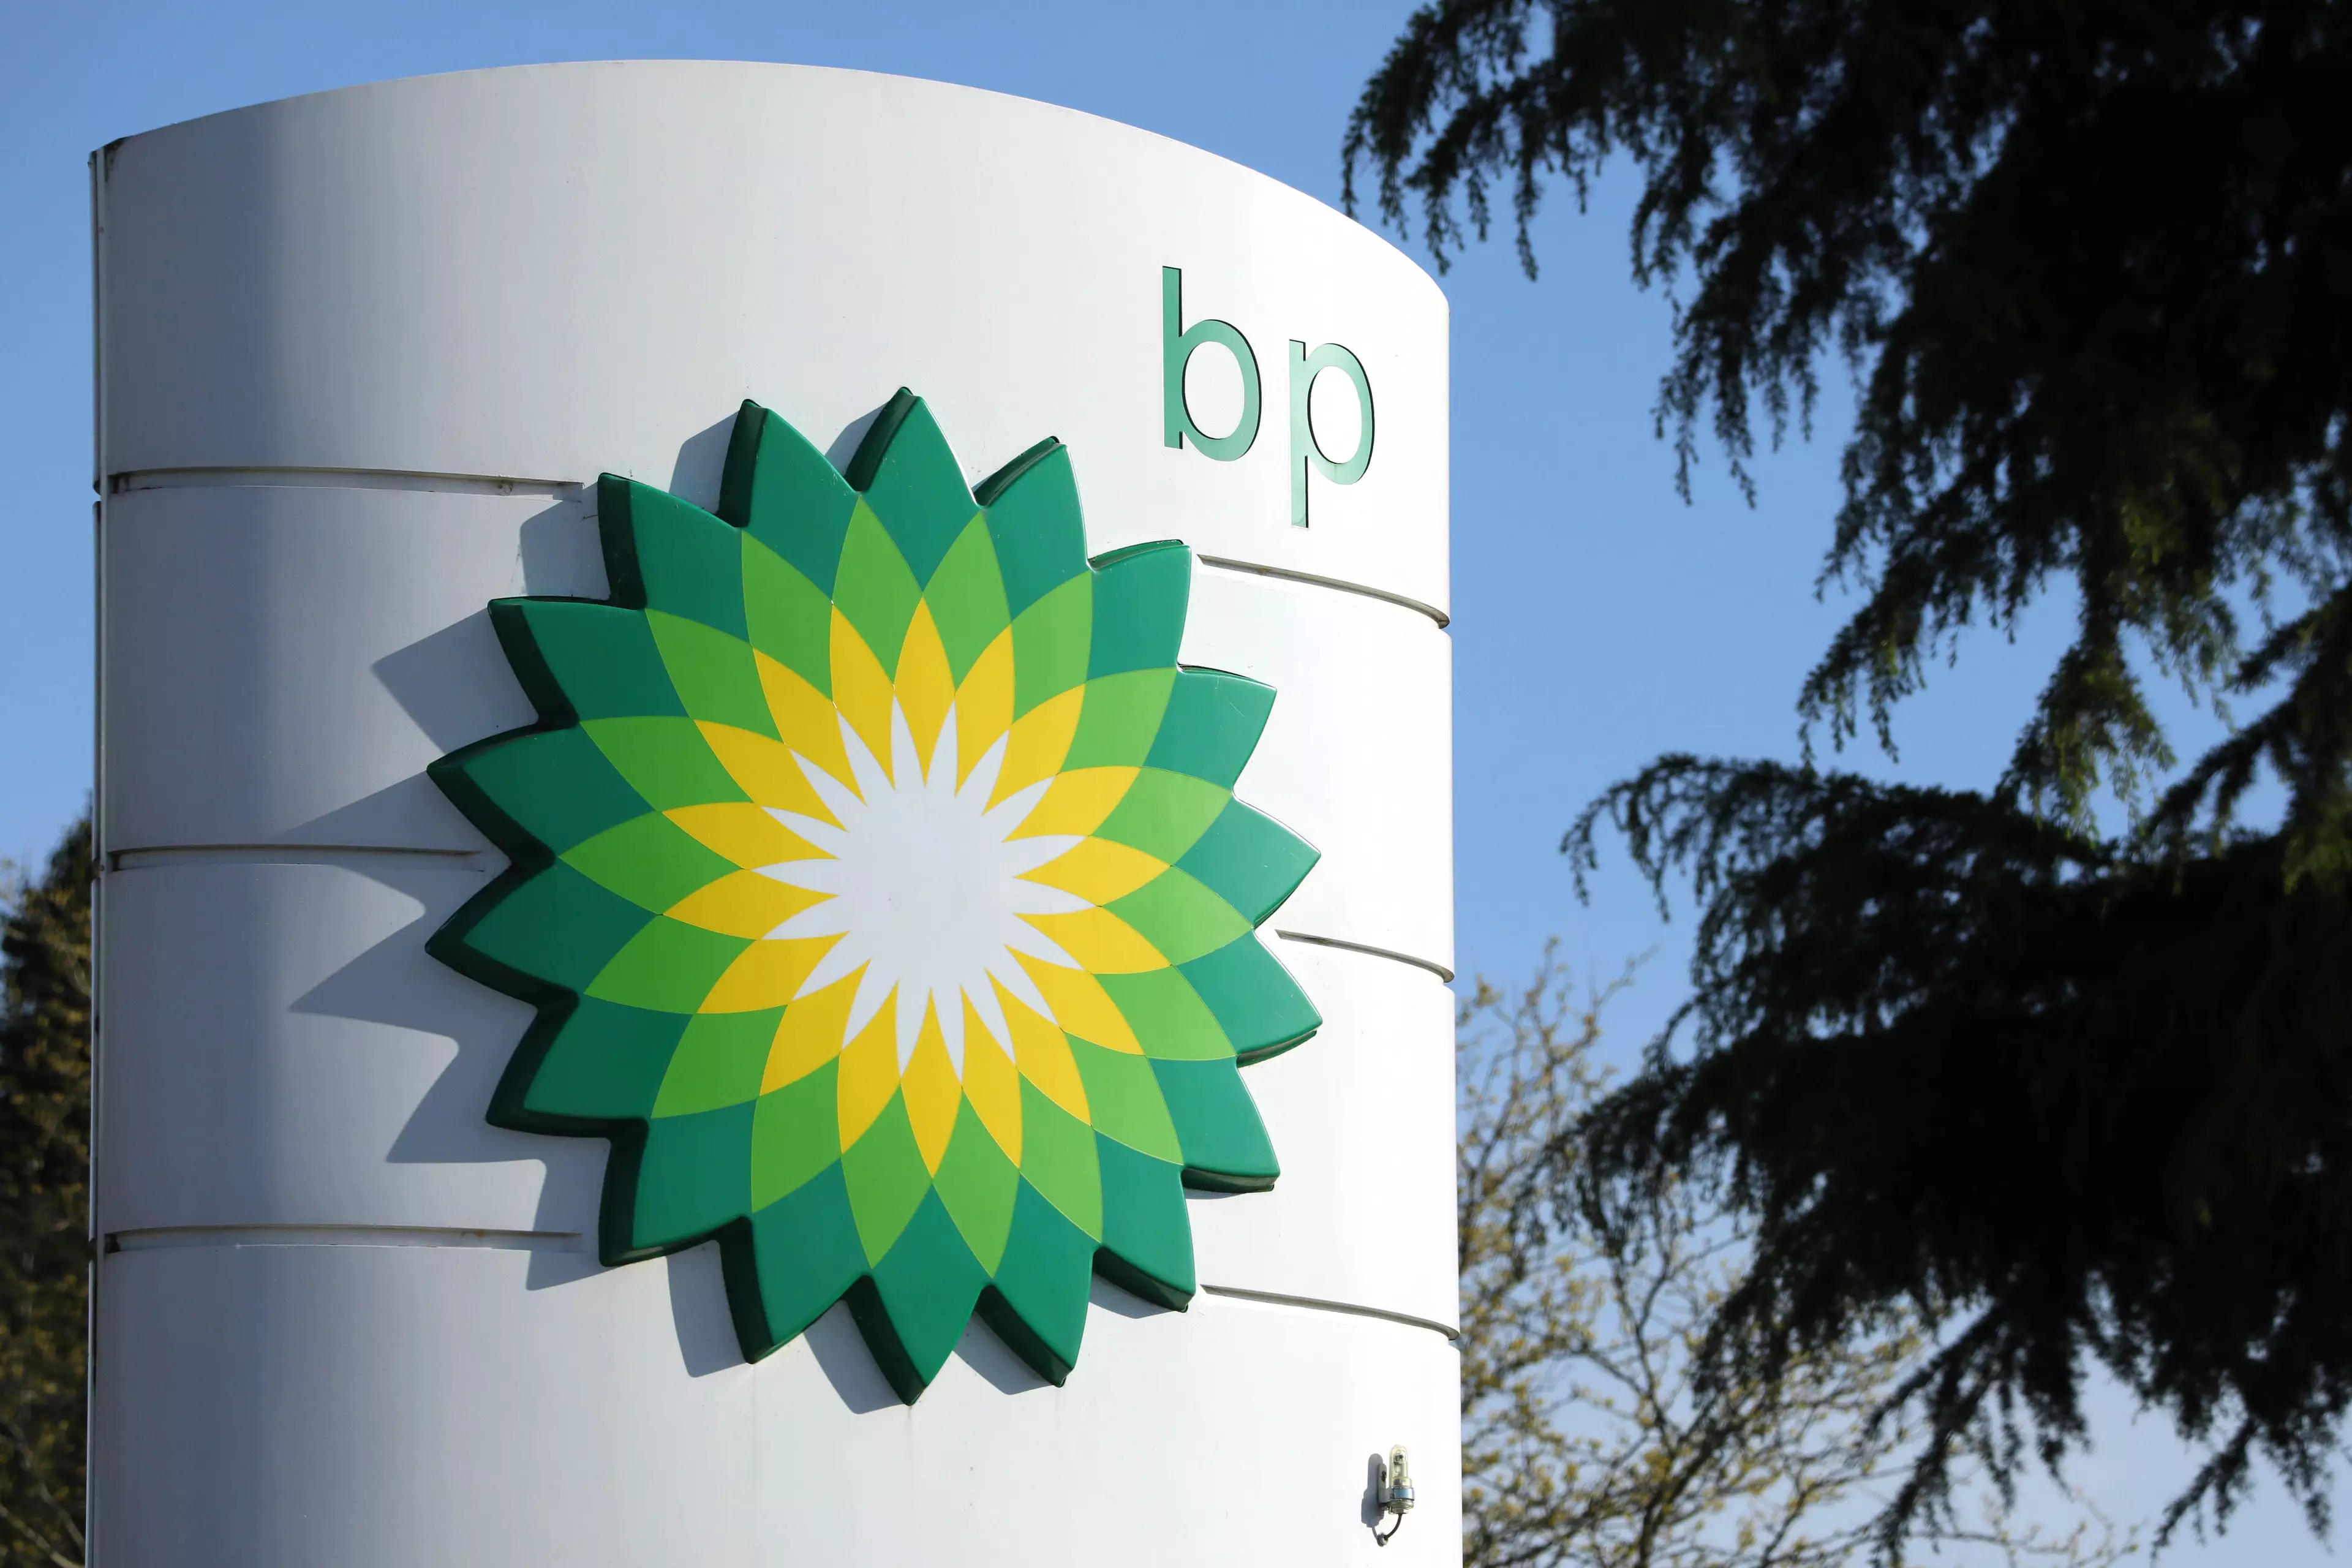 BP has been urged to apologise to Mr Tracey.